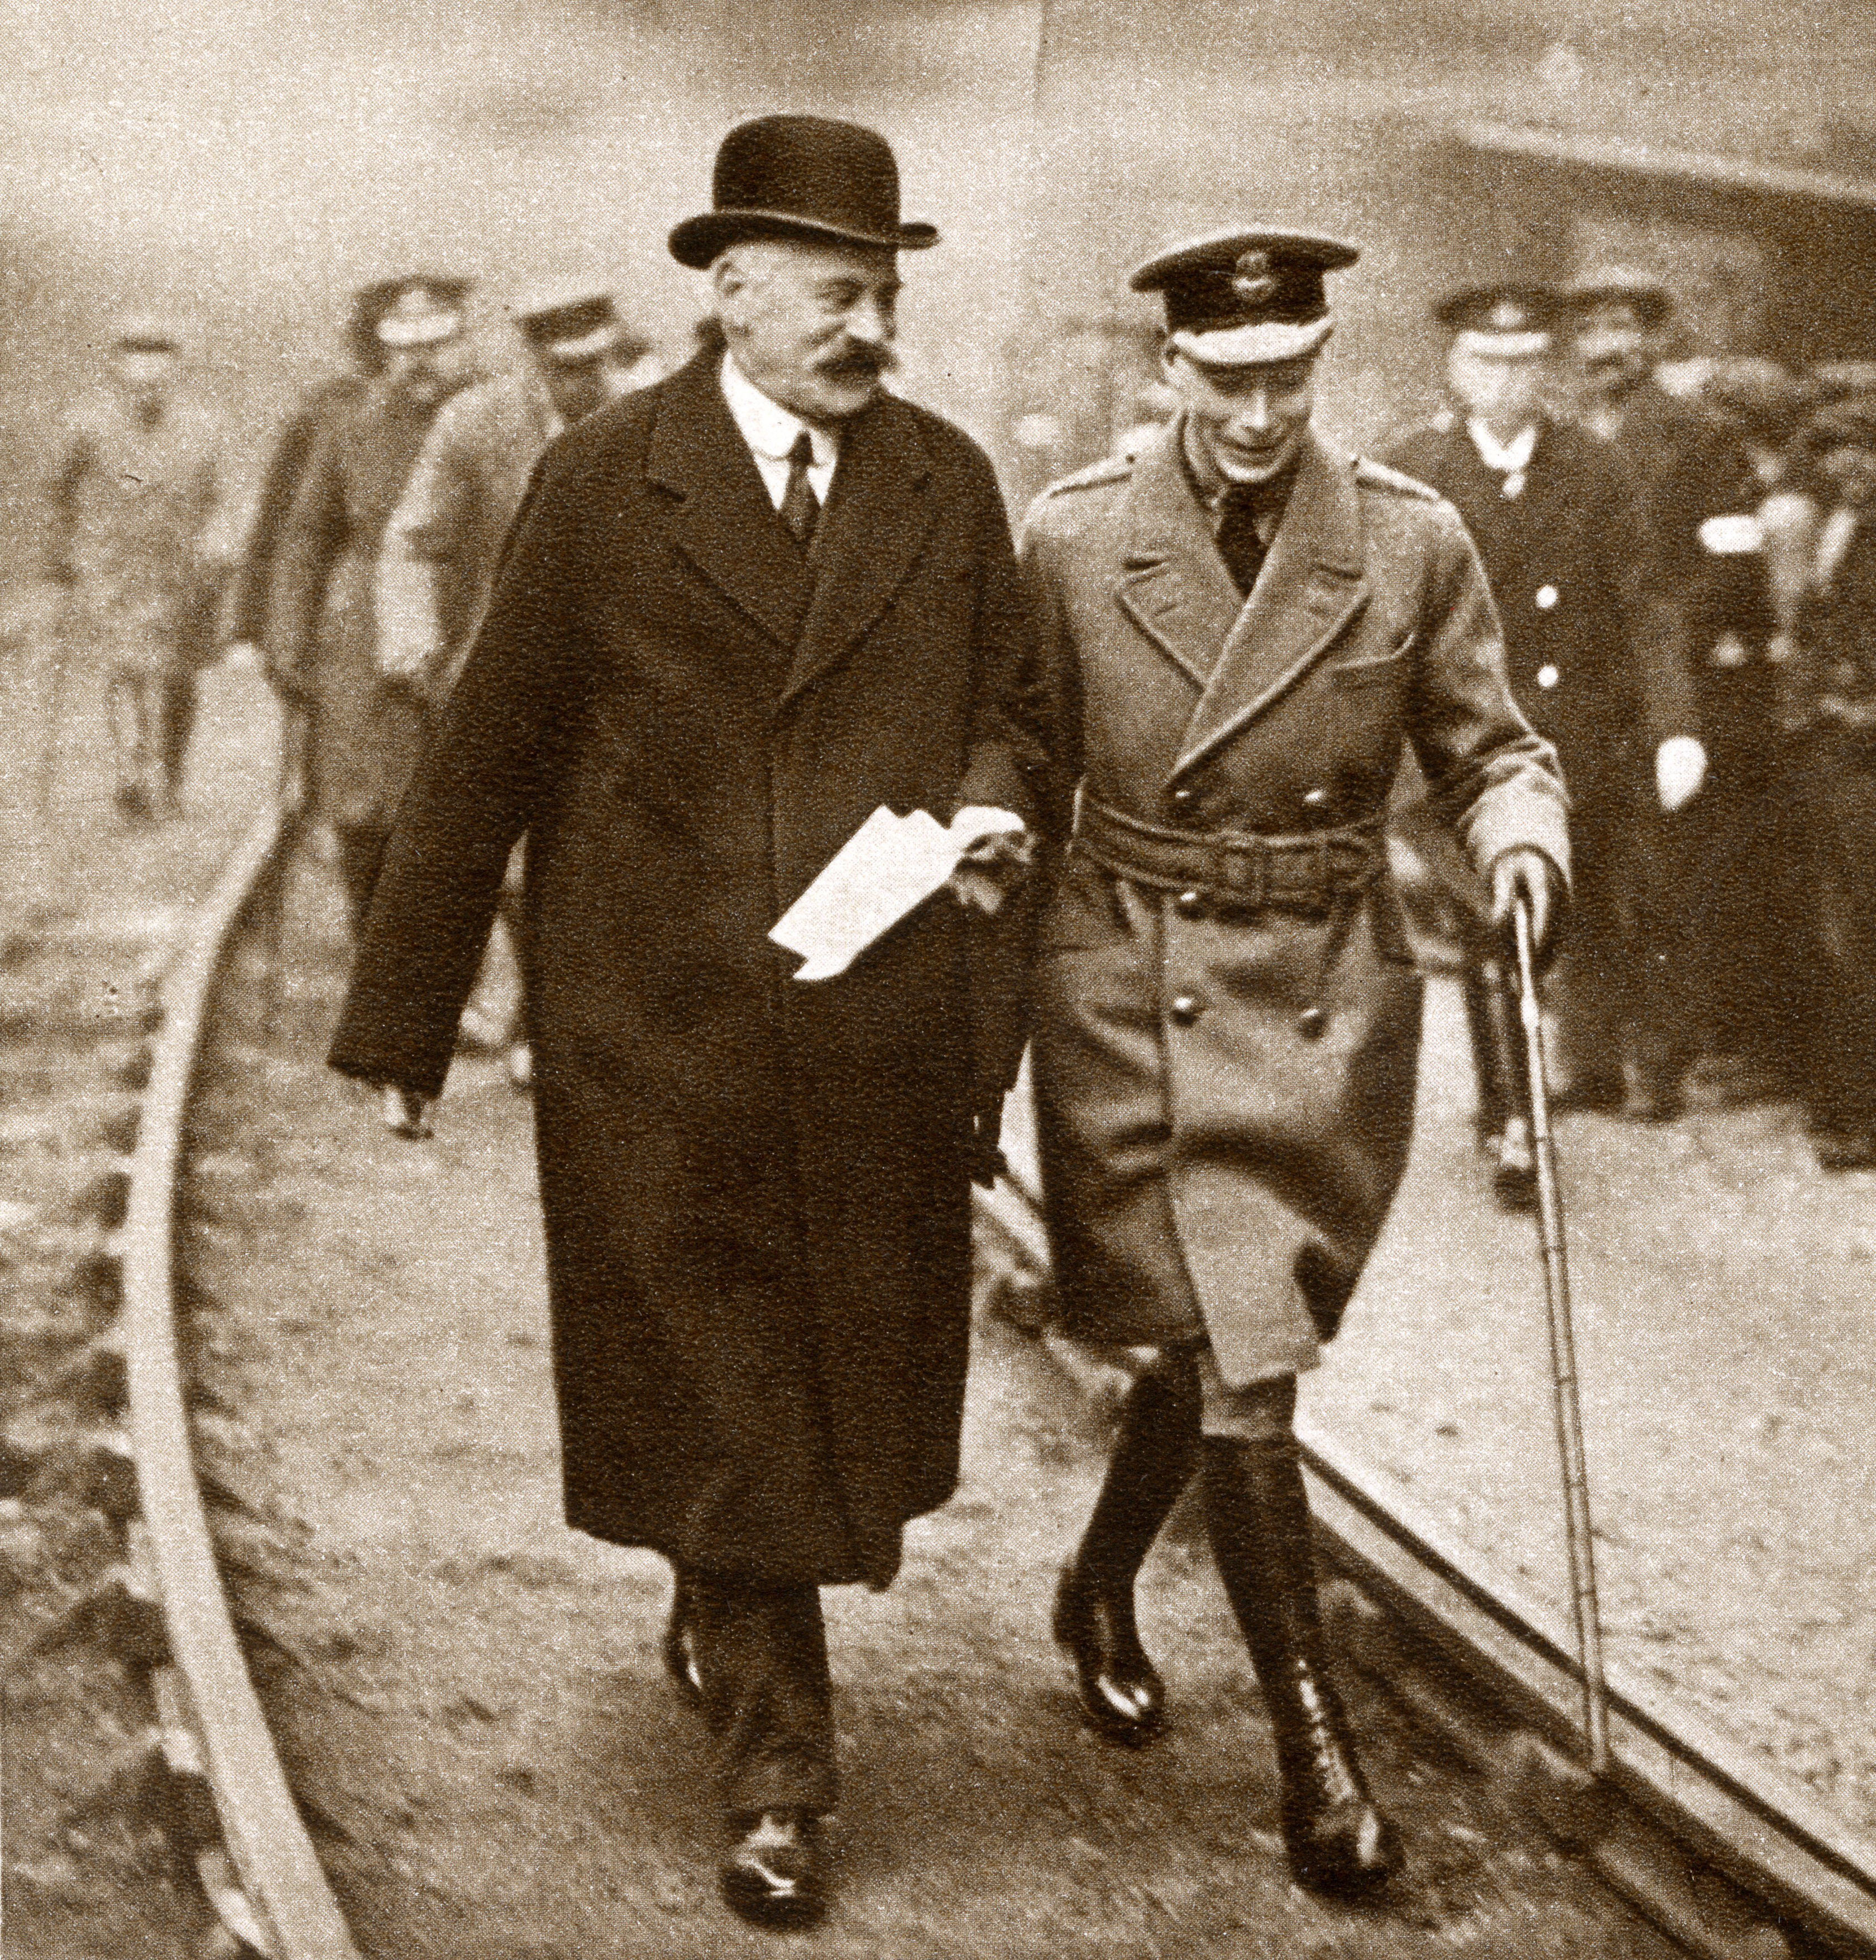 <p>Prince Albert (later King George VI) spent eight hours inspecting Glasgow, Scotland, factories in December 1919, including during a visit to William Beardmore and Company, a Scottish engineering and shipbuilding conglomerate. He's pictured walking with William Beardmore, 1st Baron Invernairn, in 1919.</p>